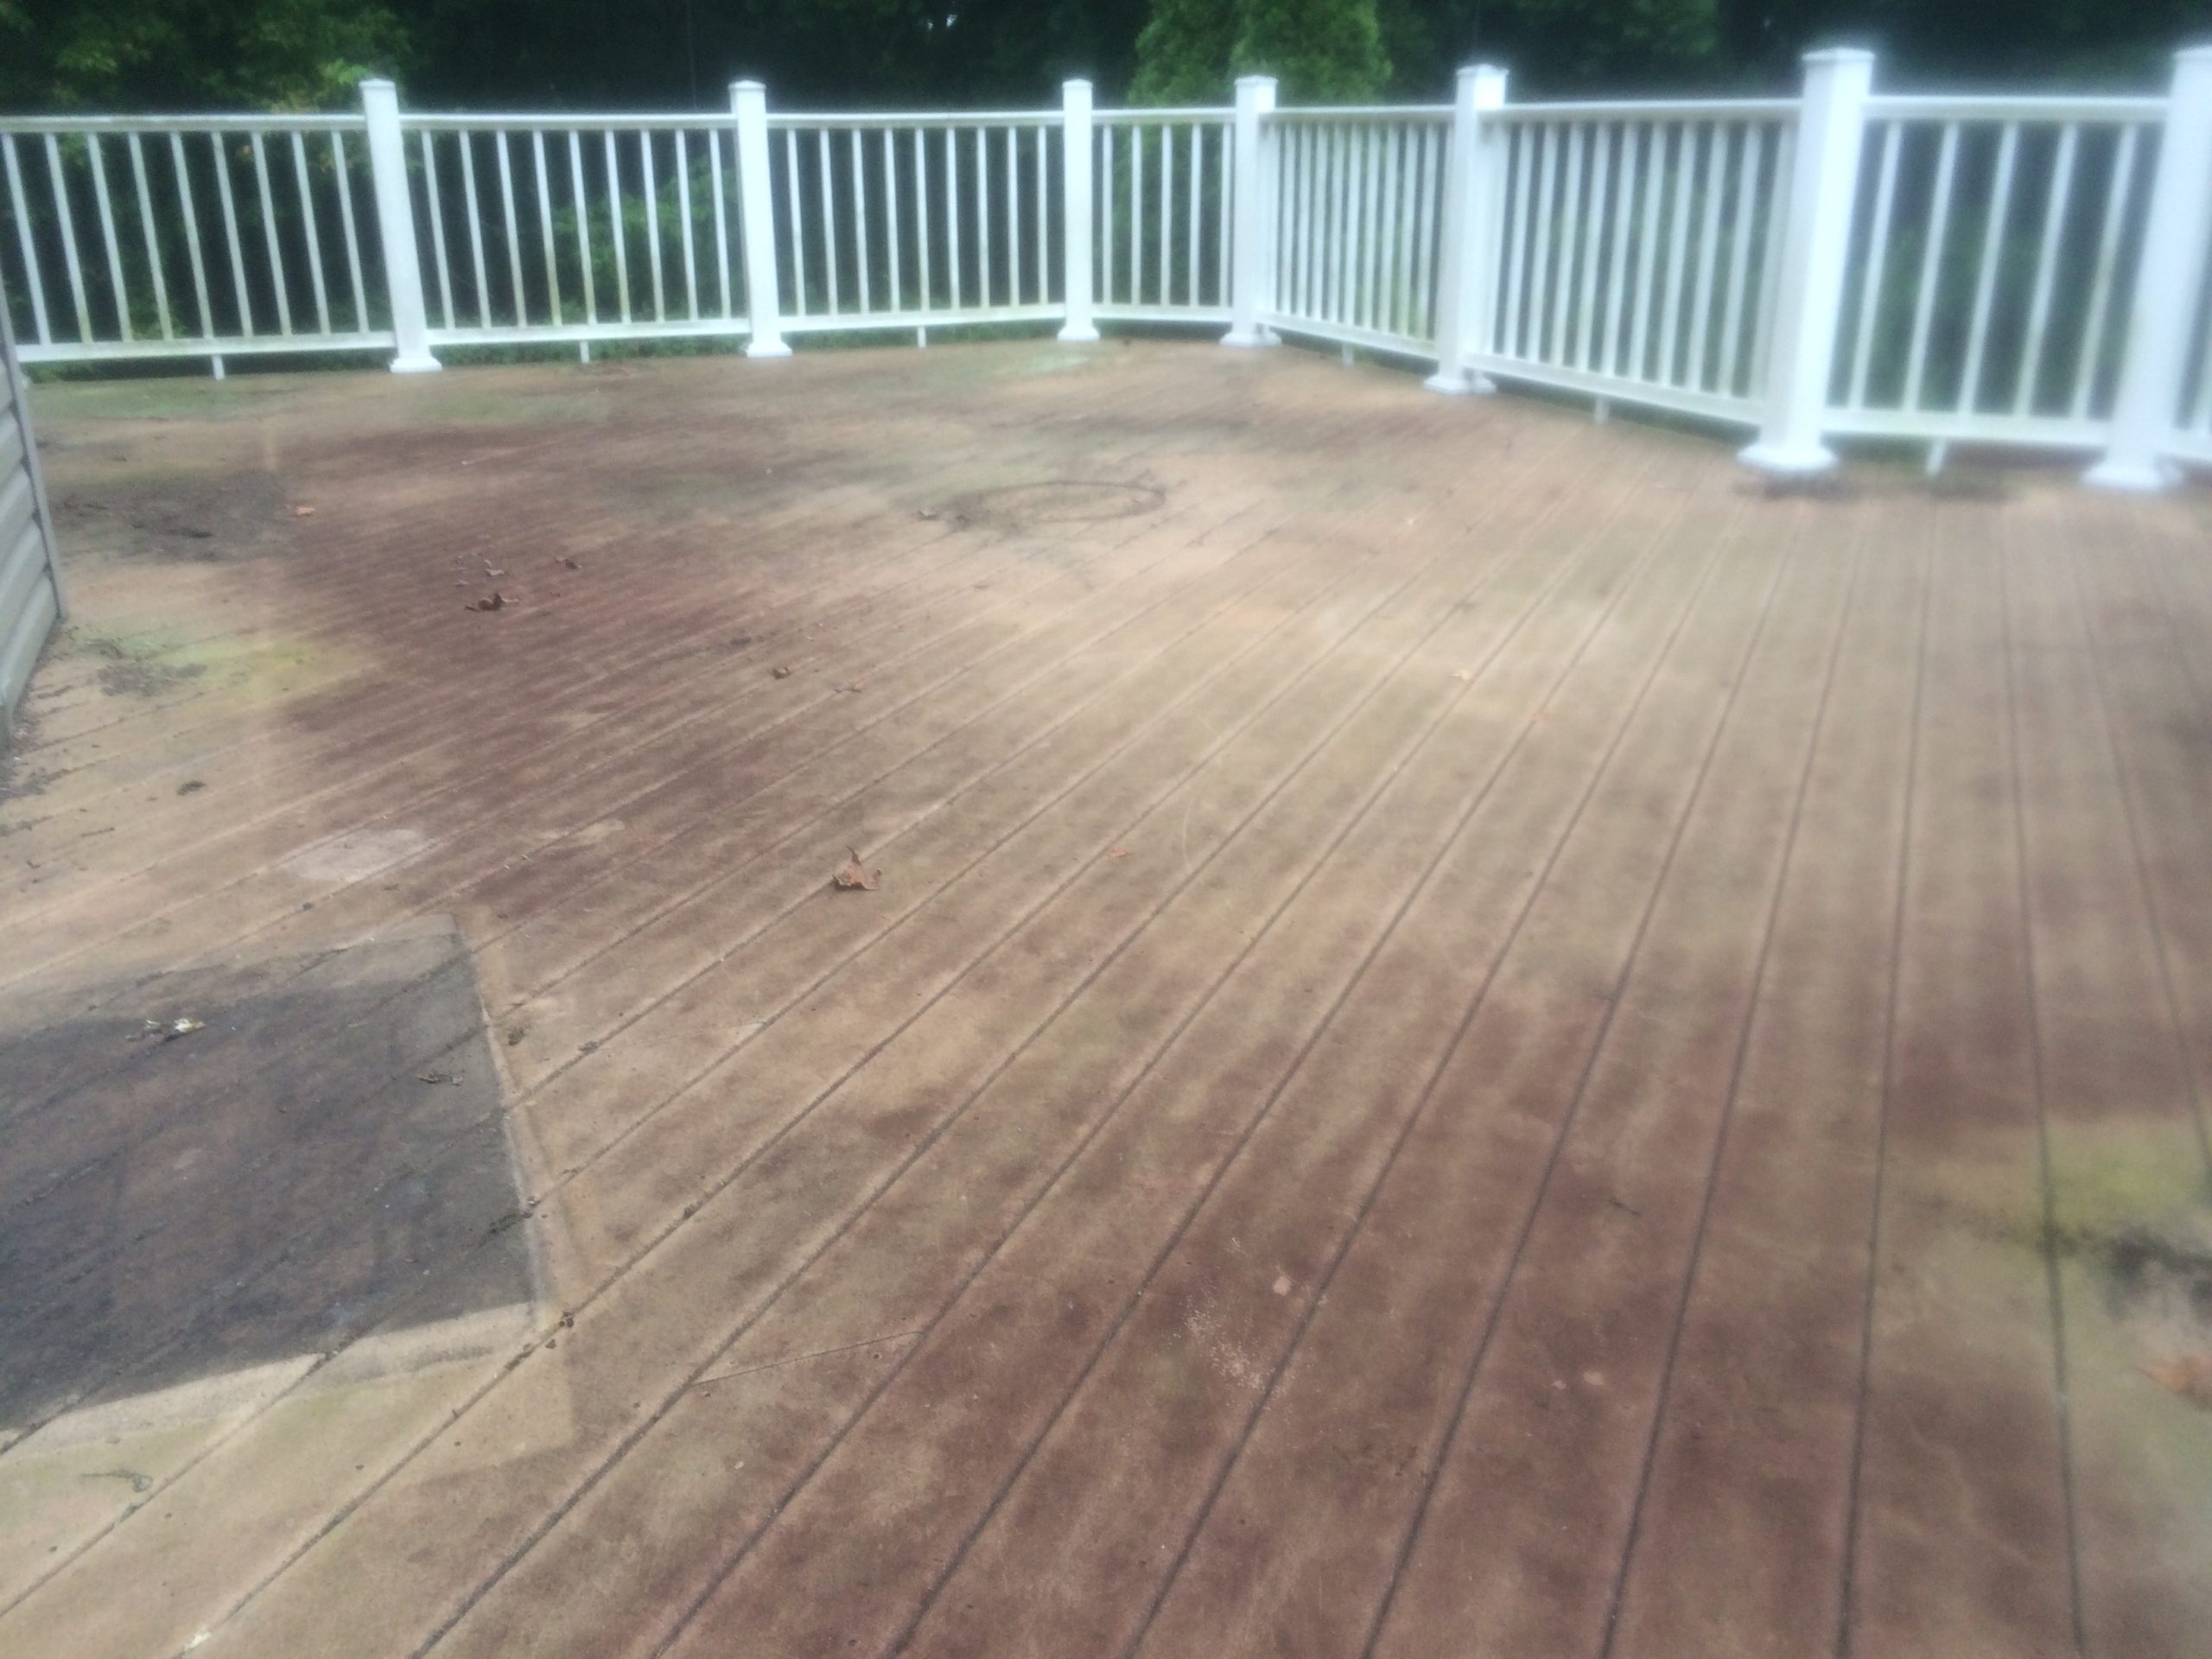 Innovative Pressure Cleaning New Jersey Pressure Washing Services